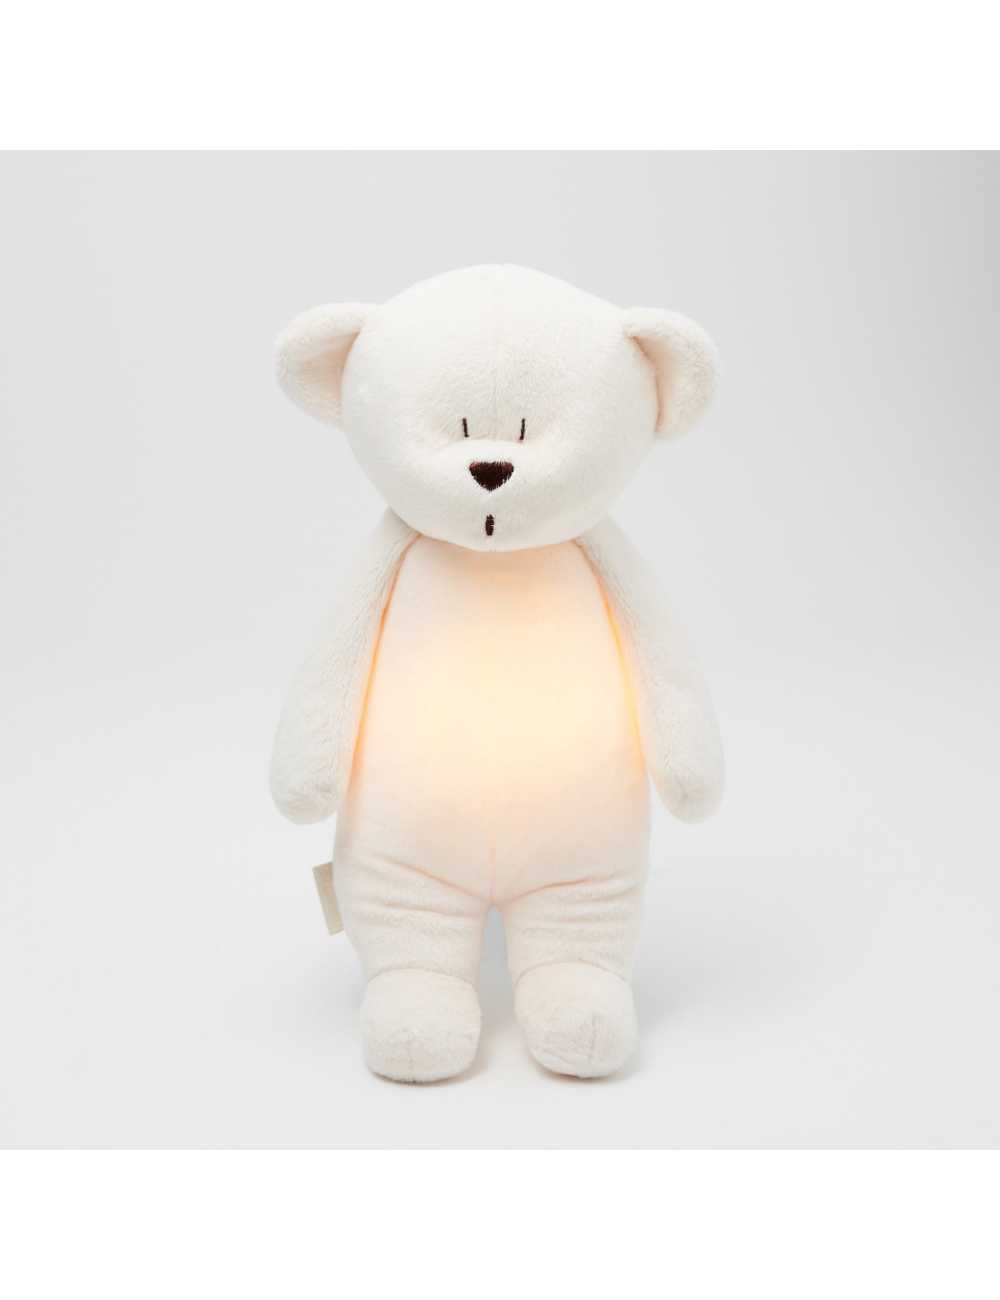 Moonie humming bear with a lamp | Cream | NEW